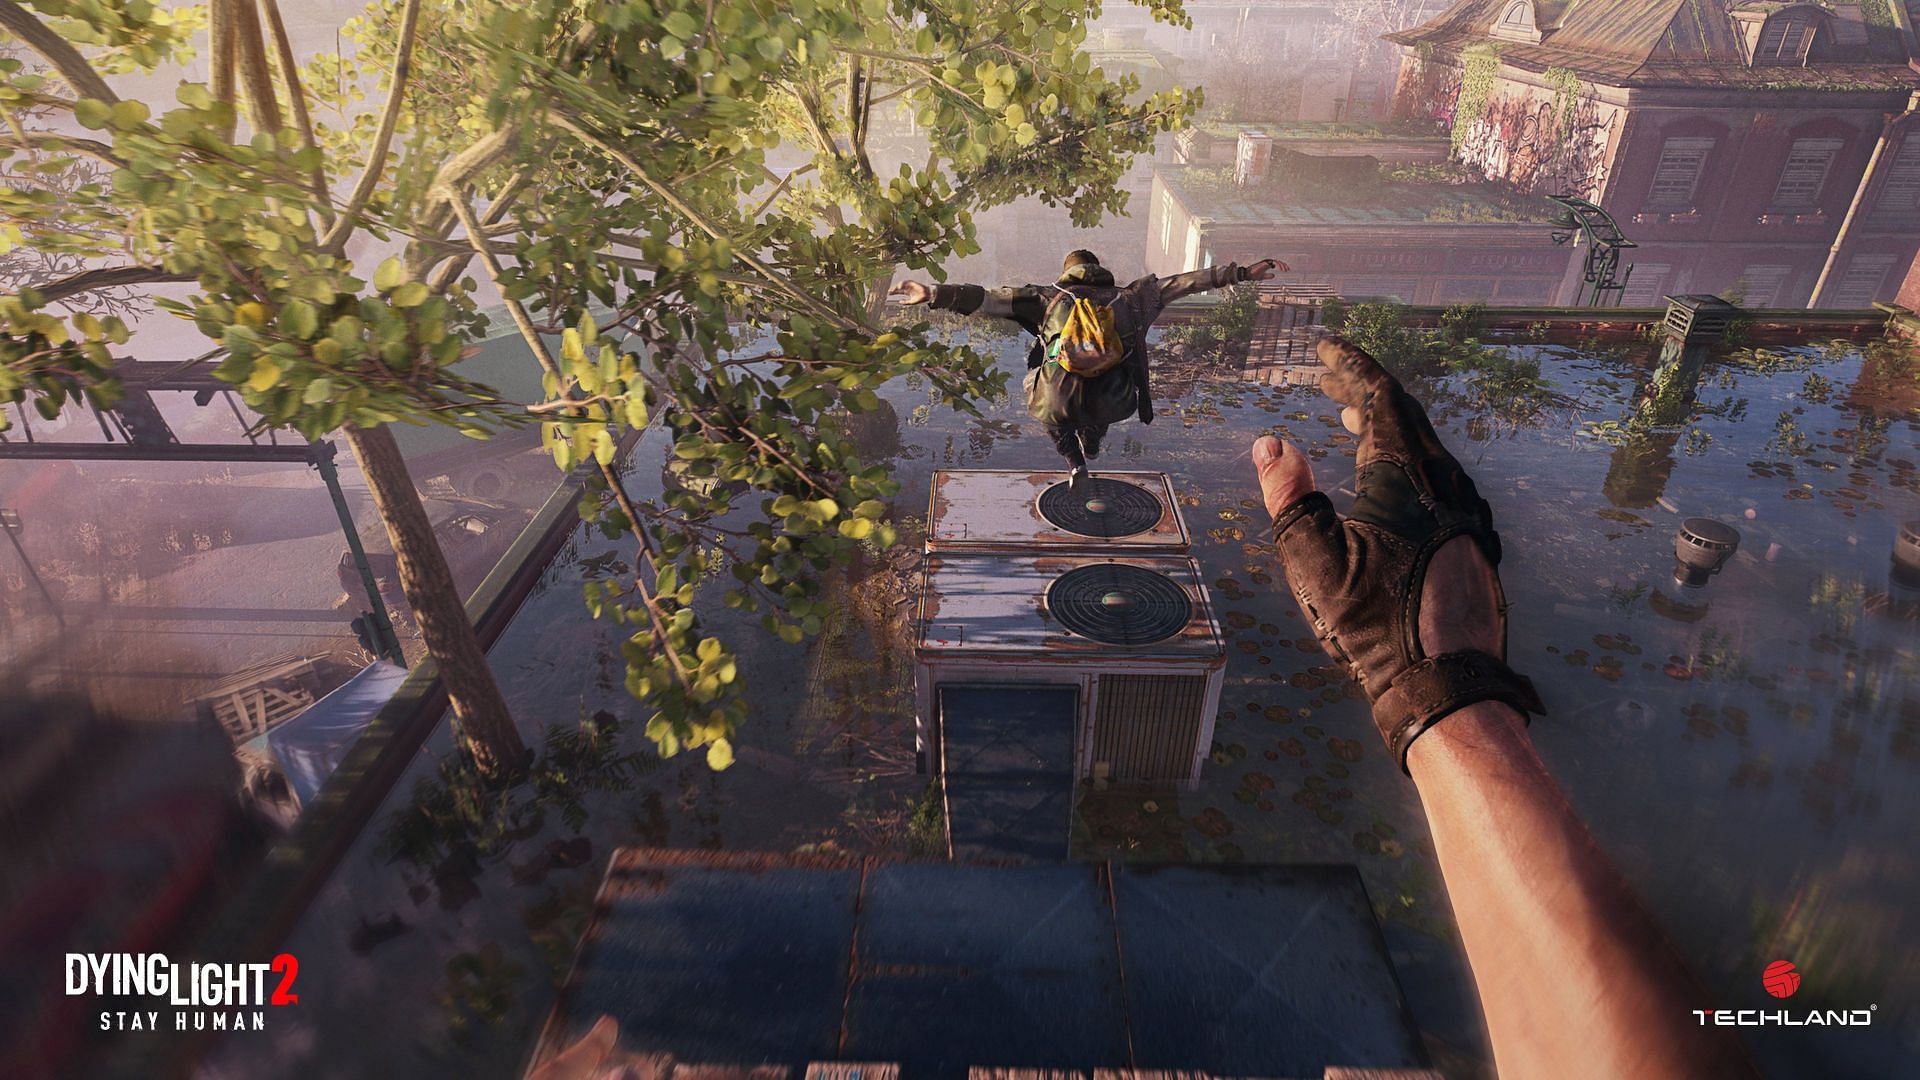 Dying Light 2: How to Unlock and Play Co-Op